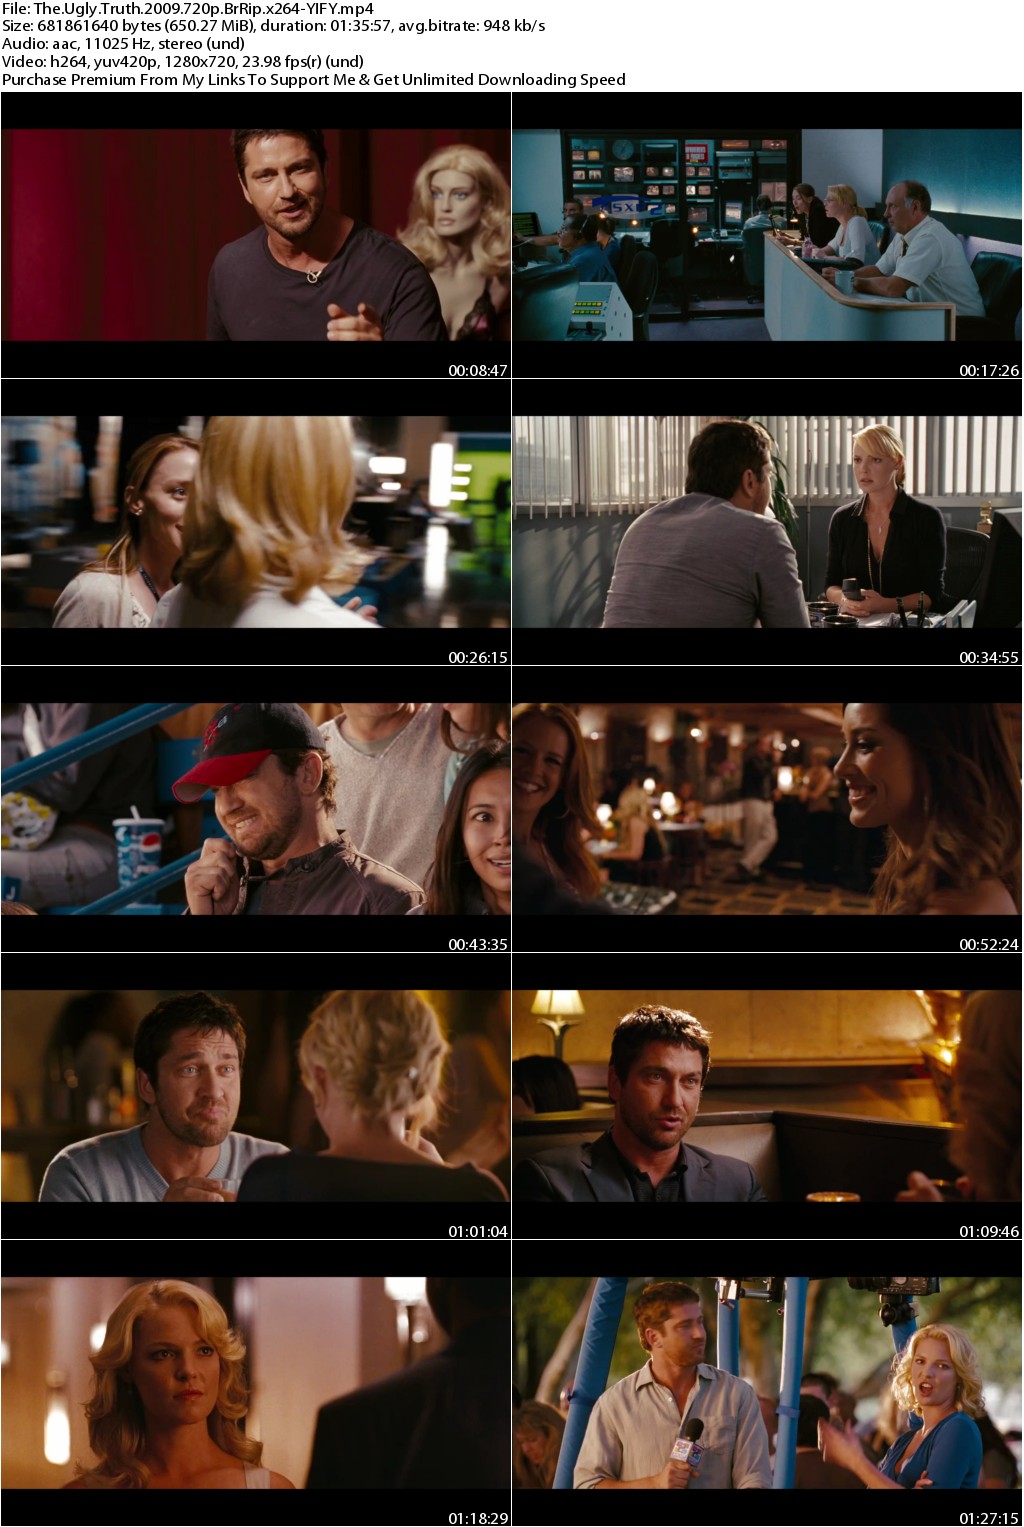 The Ugly Truth (2009) 720p BrRip x264-YIFY